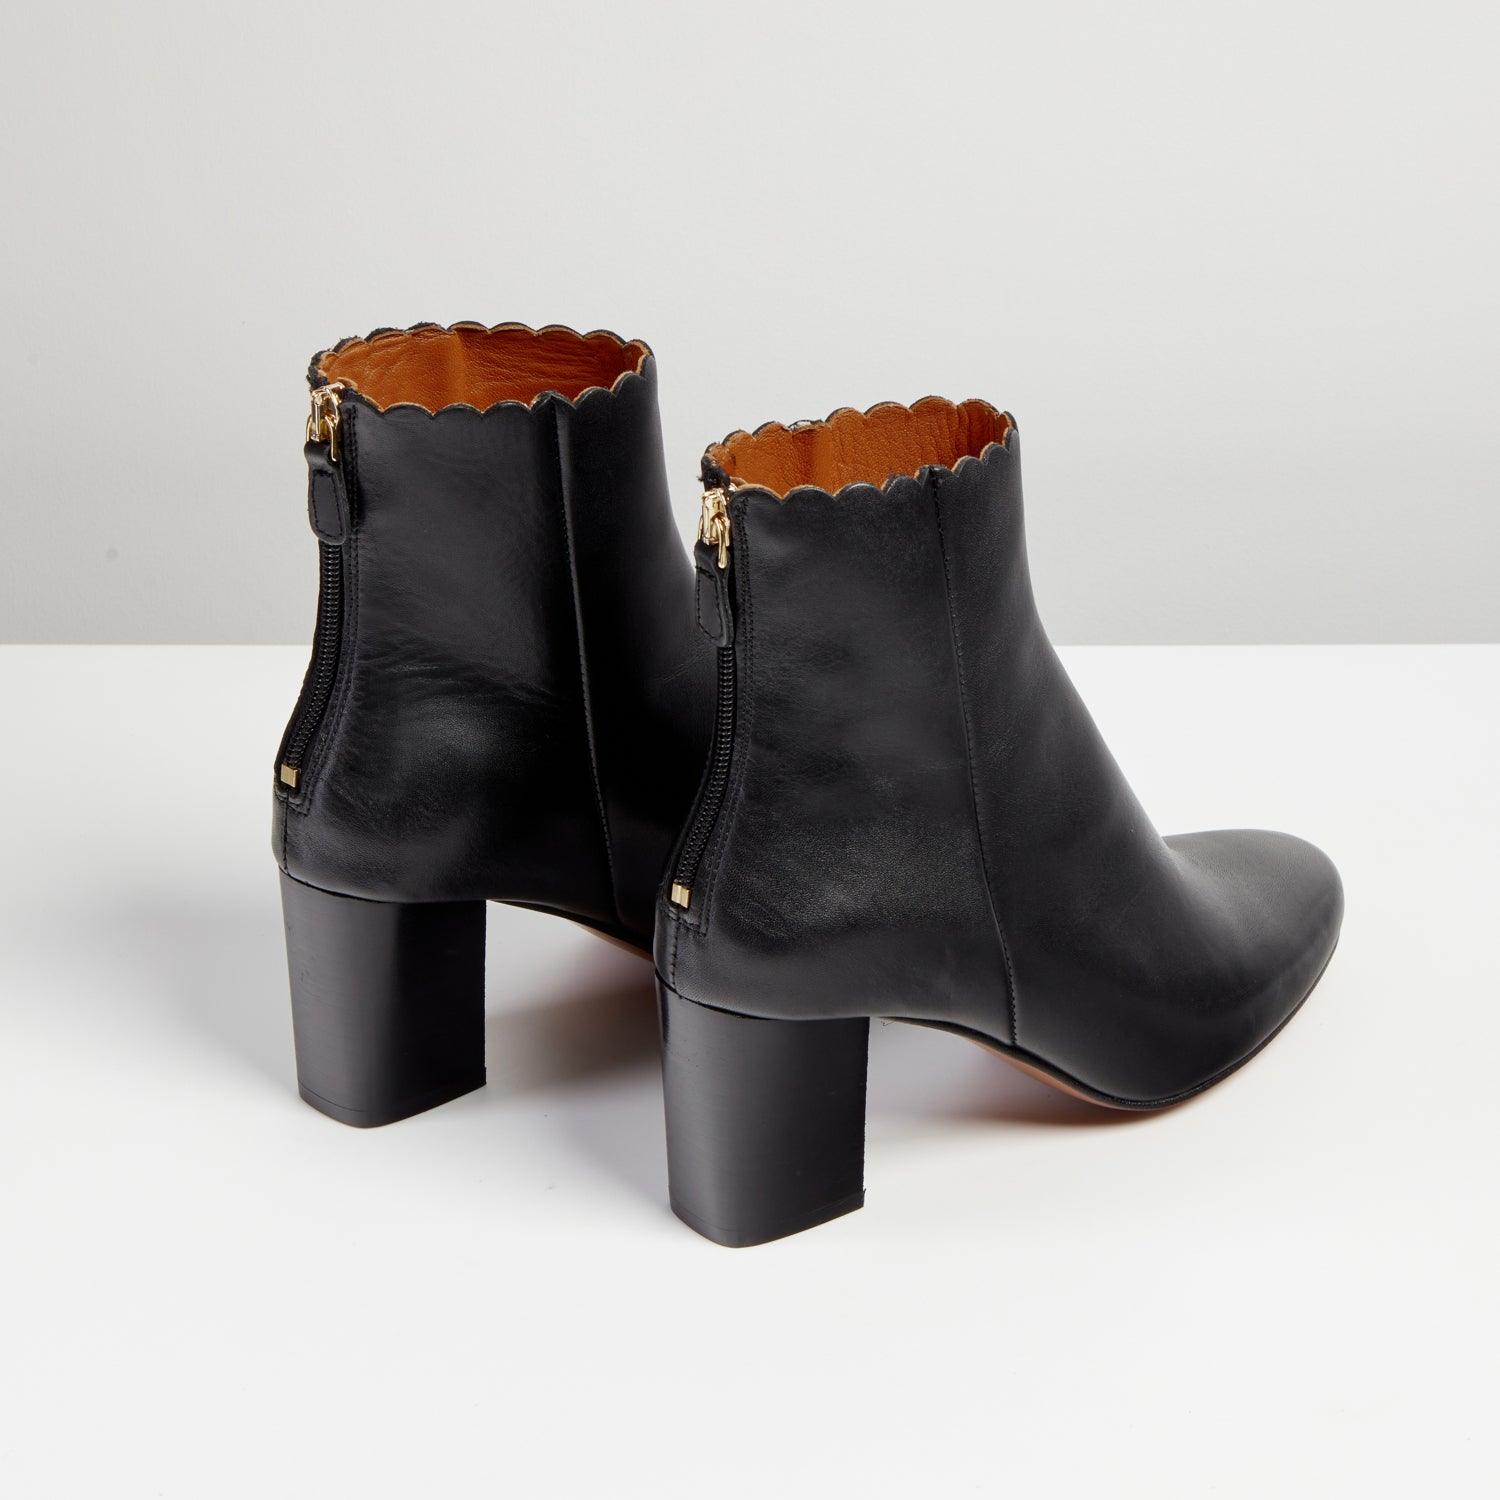 Maison Toufet Giselle Black Ankle Bootb - MADE THE EDIT